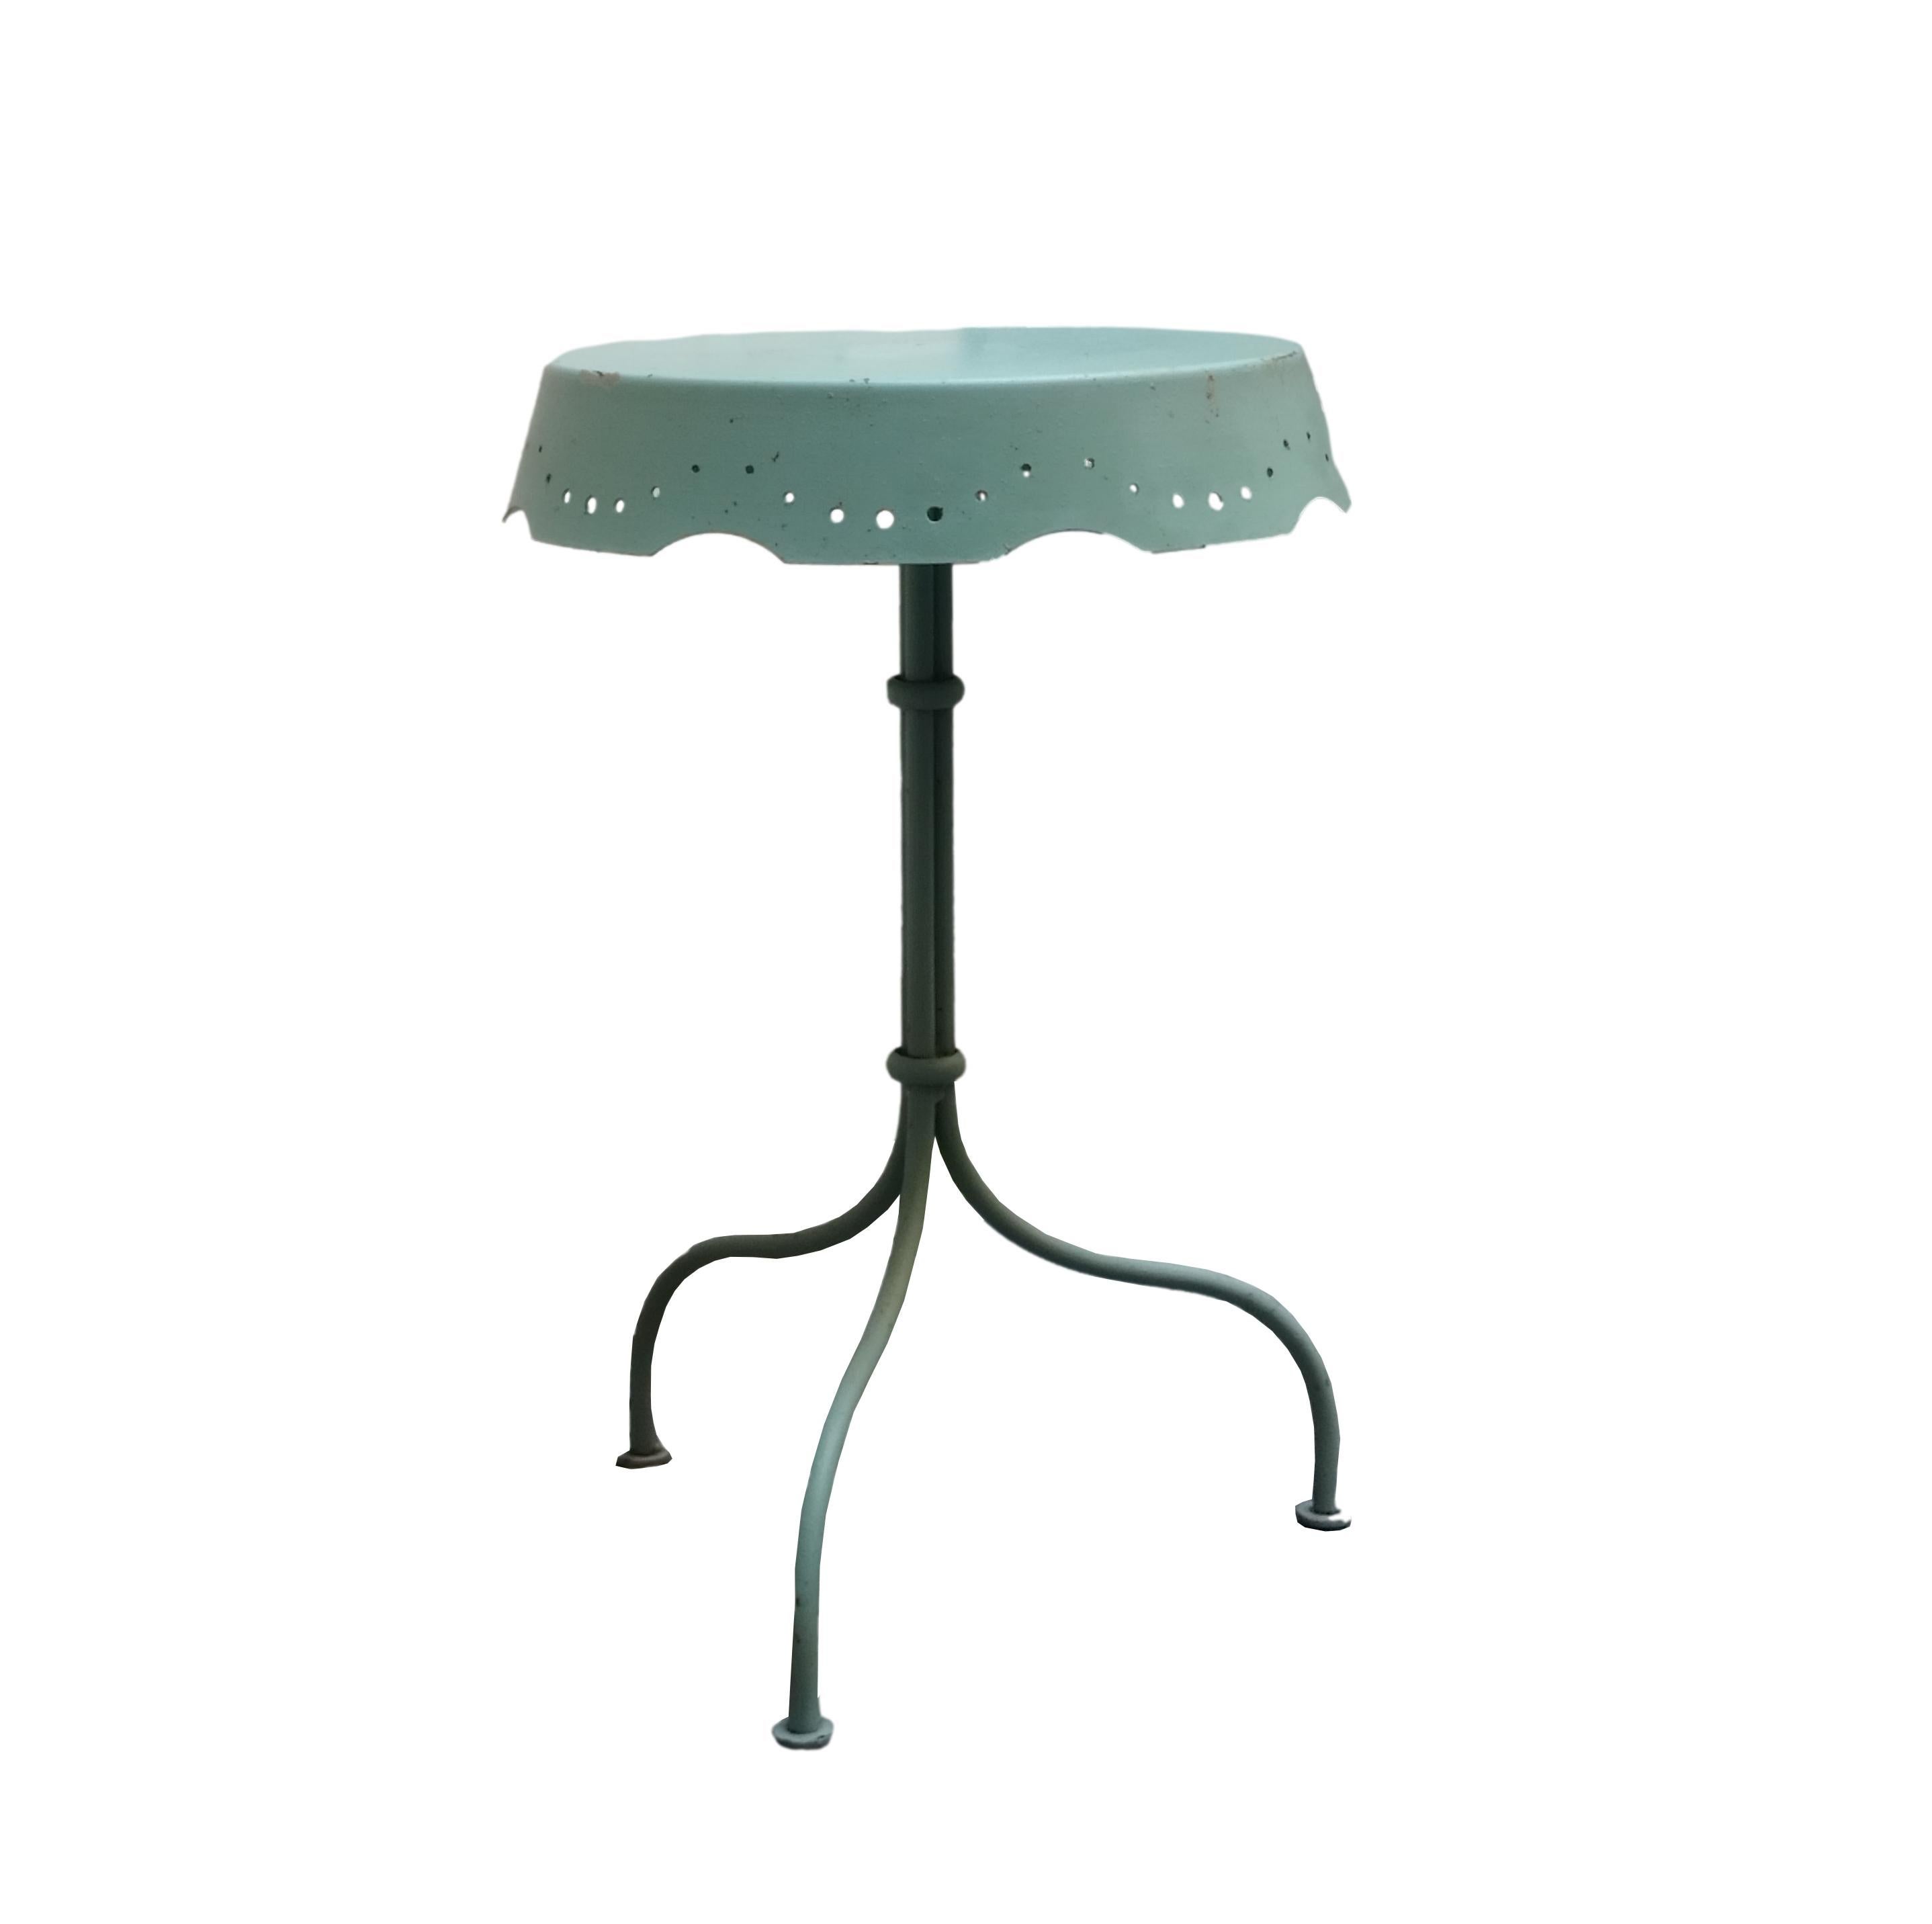 A stunning interplay of sinuous, sleek lines, this gorgeous side table is distinguished by its eye-catching, modern light green lacquer with luminous appeal. Made of iron with three gently curved legs.